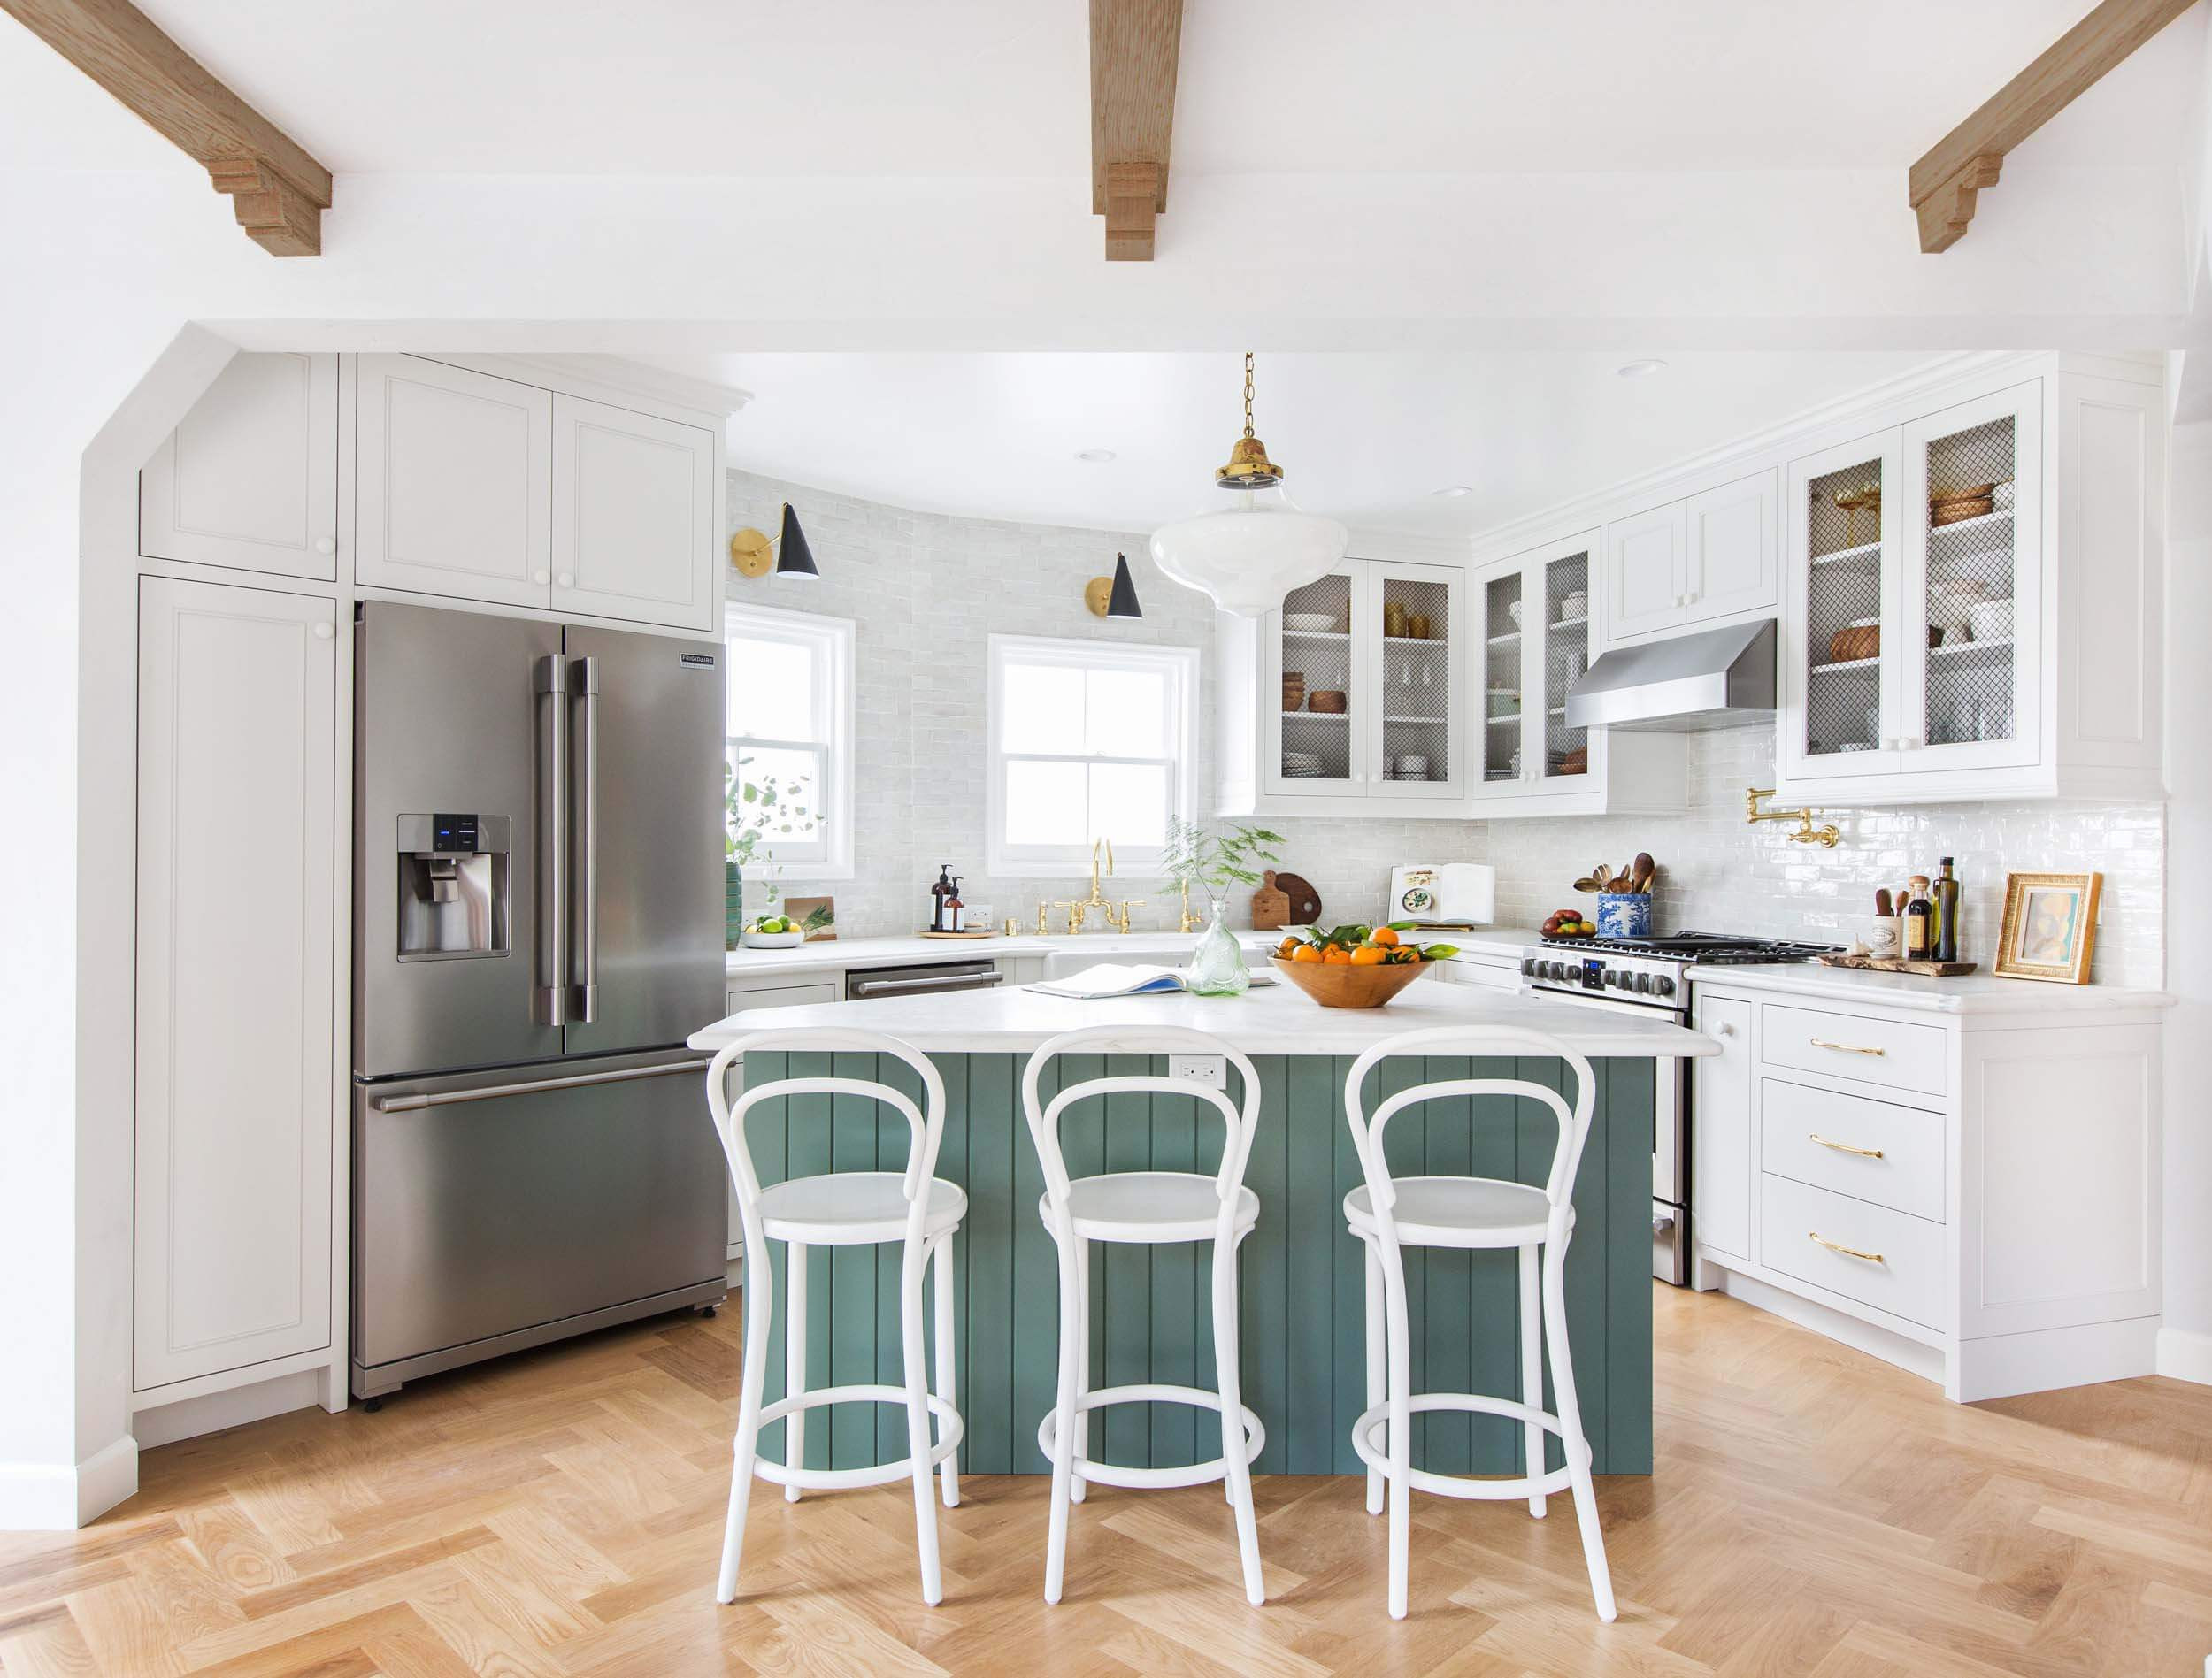 16 Awesome Laminate Flooring Vs Hardwood Resale Value 2024 free download laminate flooring vs hardwood resale value of my kitchen design a year later lots to love some regrets emily within emily henderson frigidaire kitchen reveal waverly english modern edited be